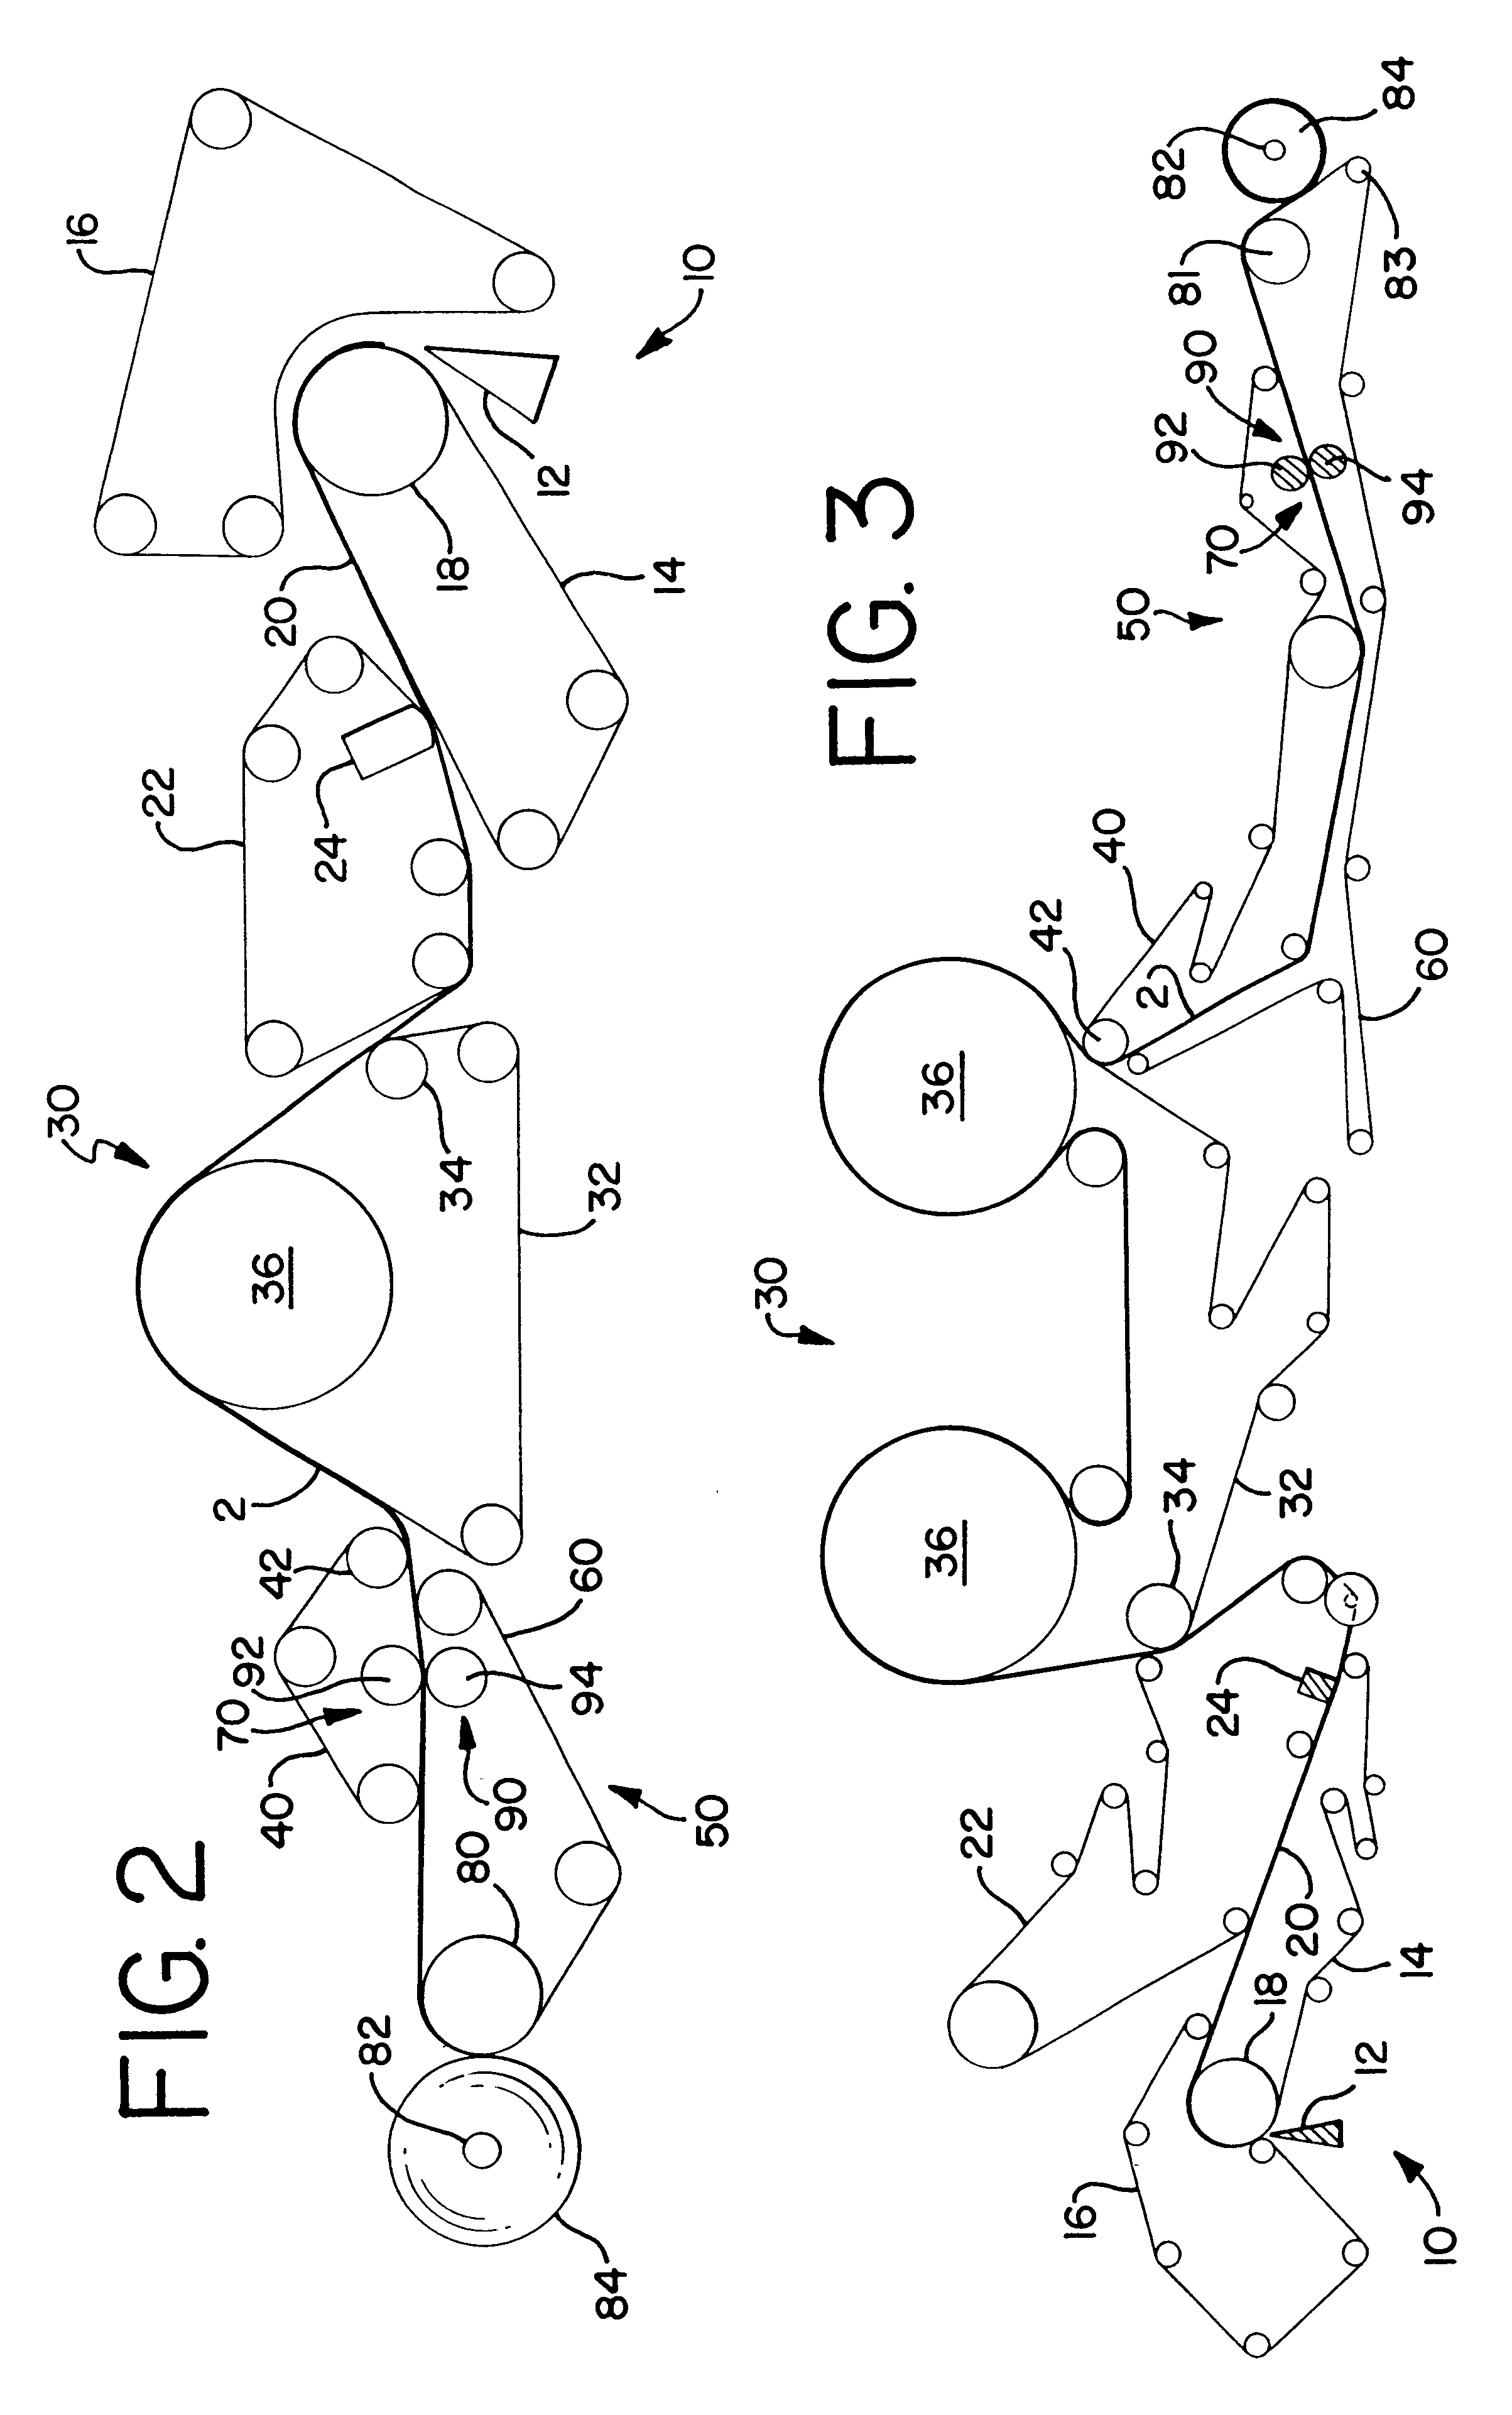 Apparatus for calendering a sheet material web carried by a fabric